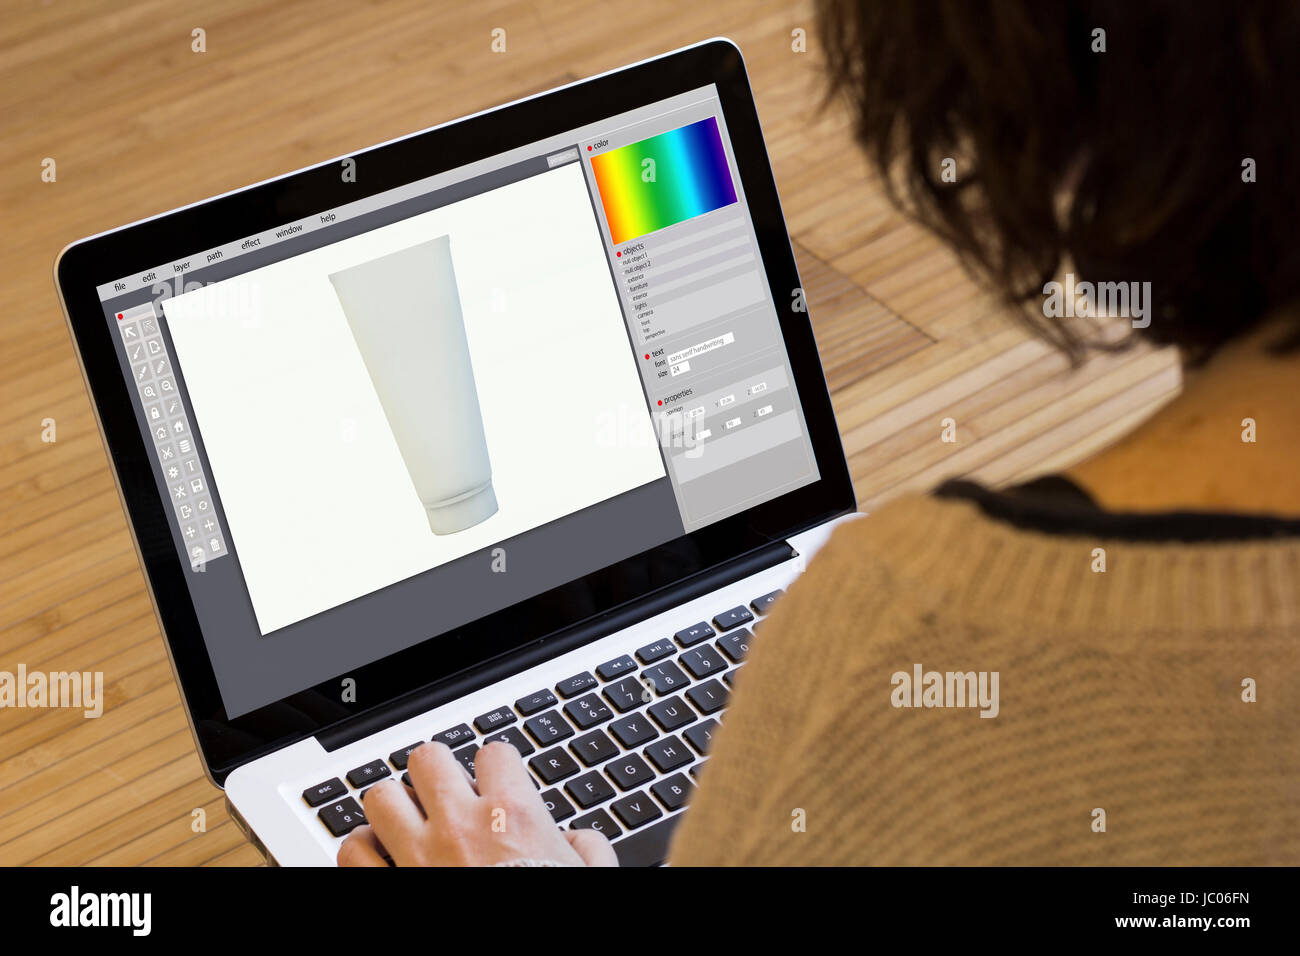 design concept: product design on a laptop screen. Screen graphics are made up. Stock Photo